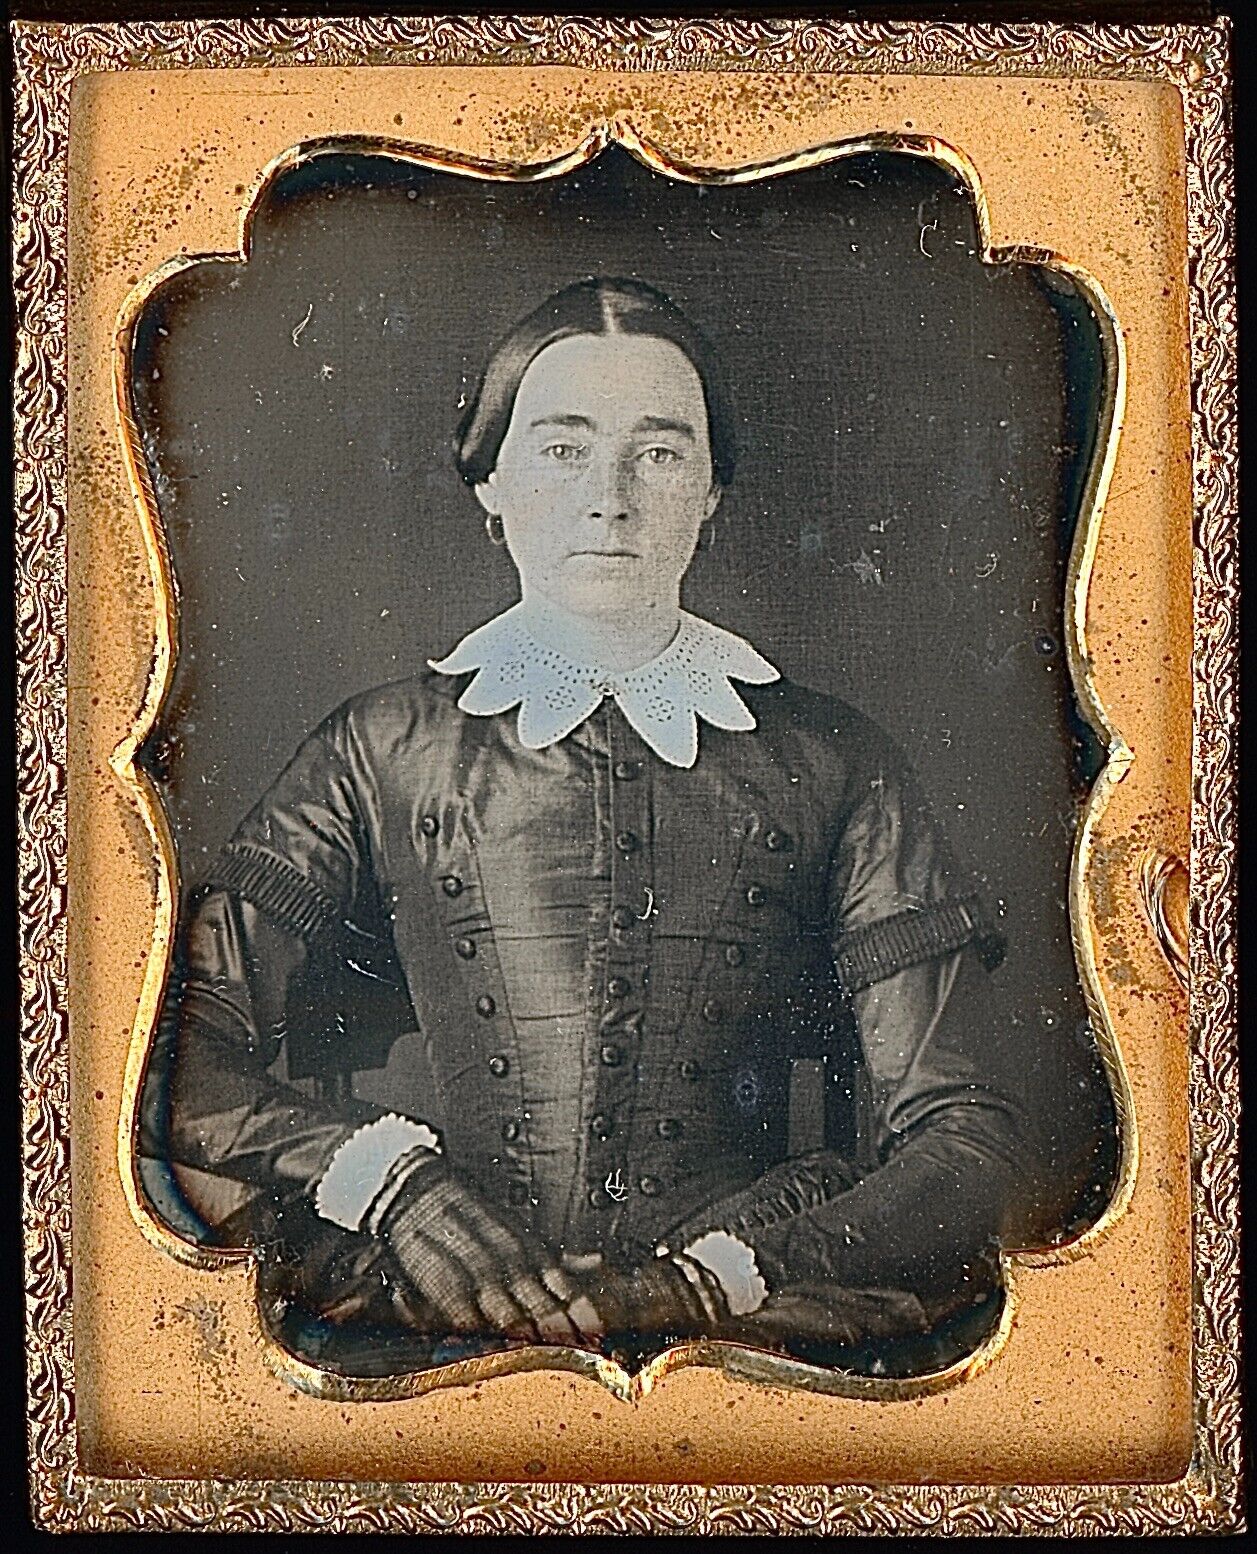 Light Eyed Woman With Freckles Wearing Lace Gloves 1/9 Plate Daguerreotype S744